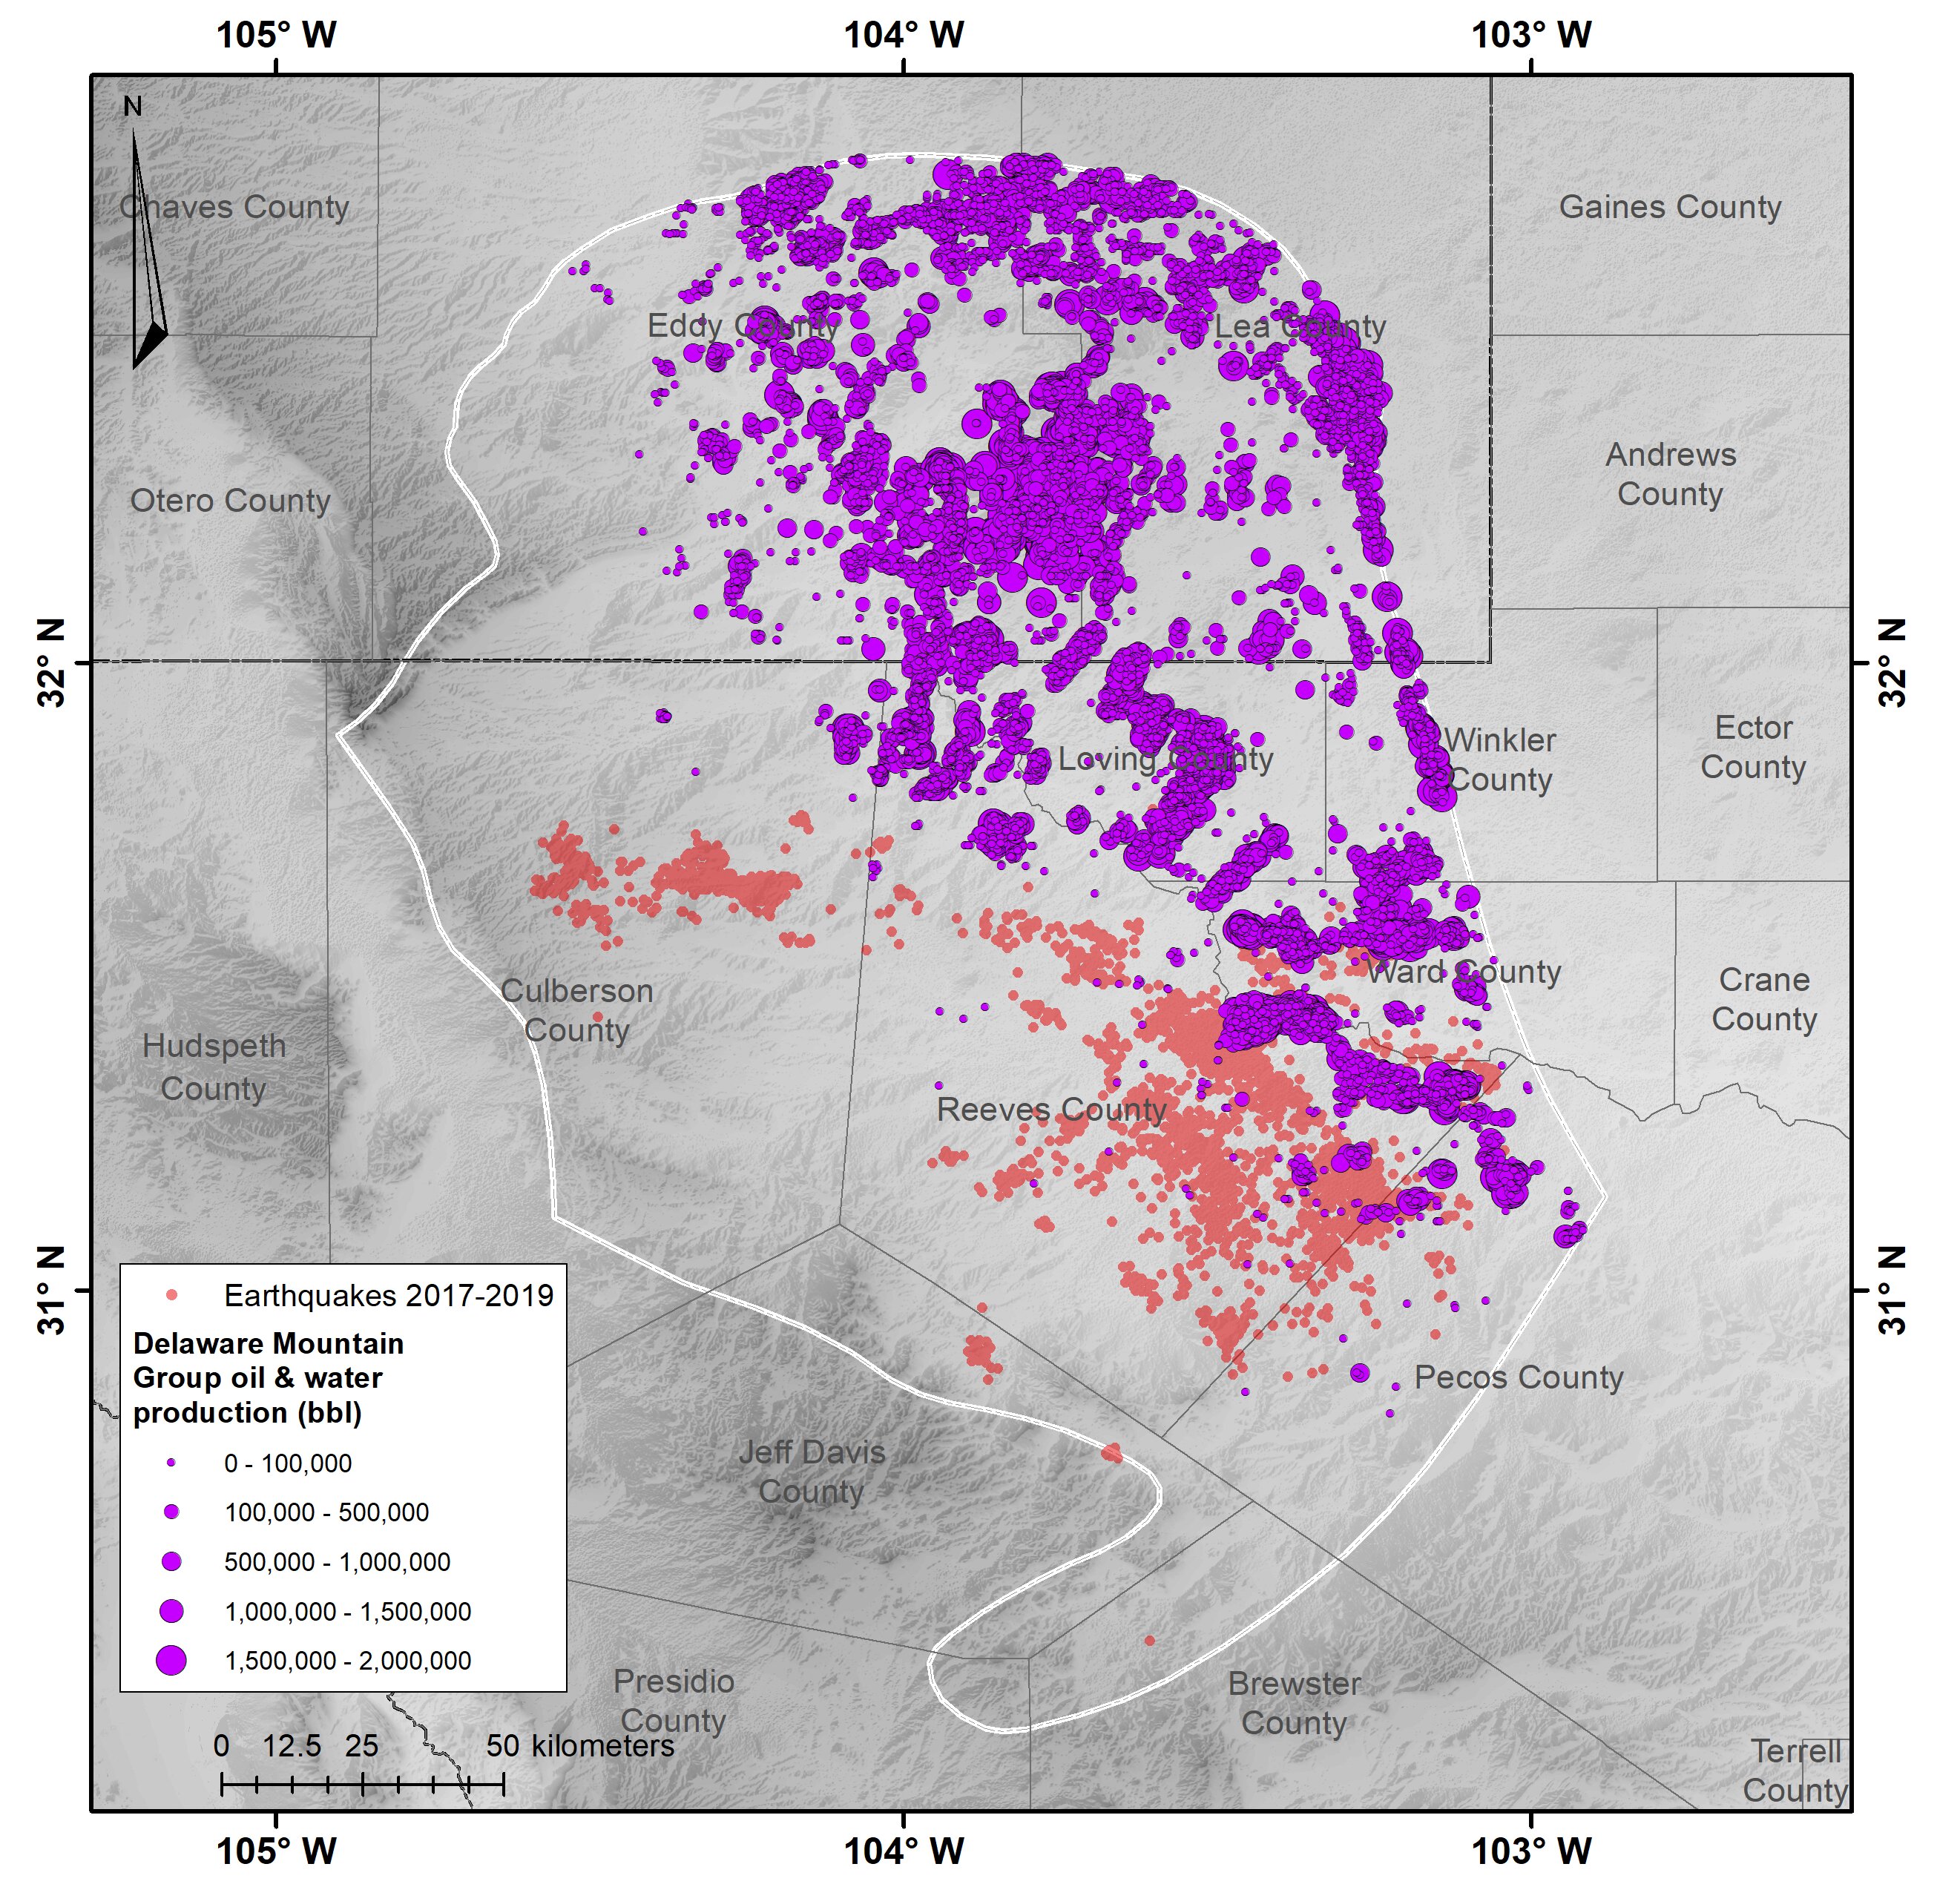 Old oil fields may be less prone to induced earthquakes